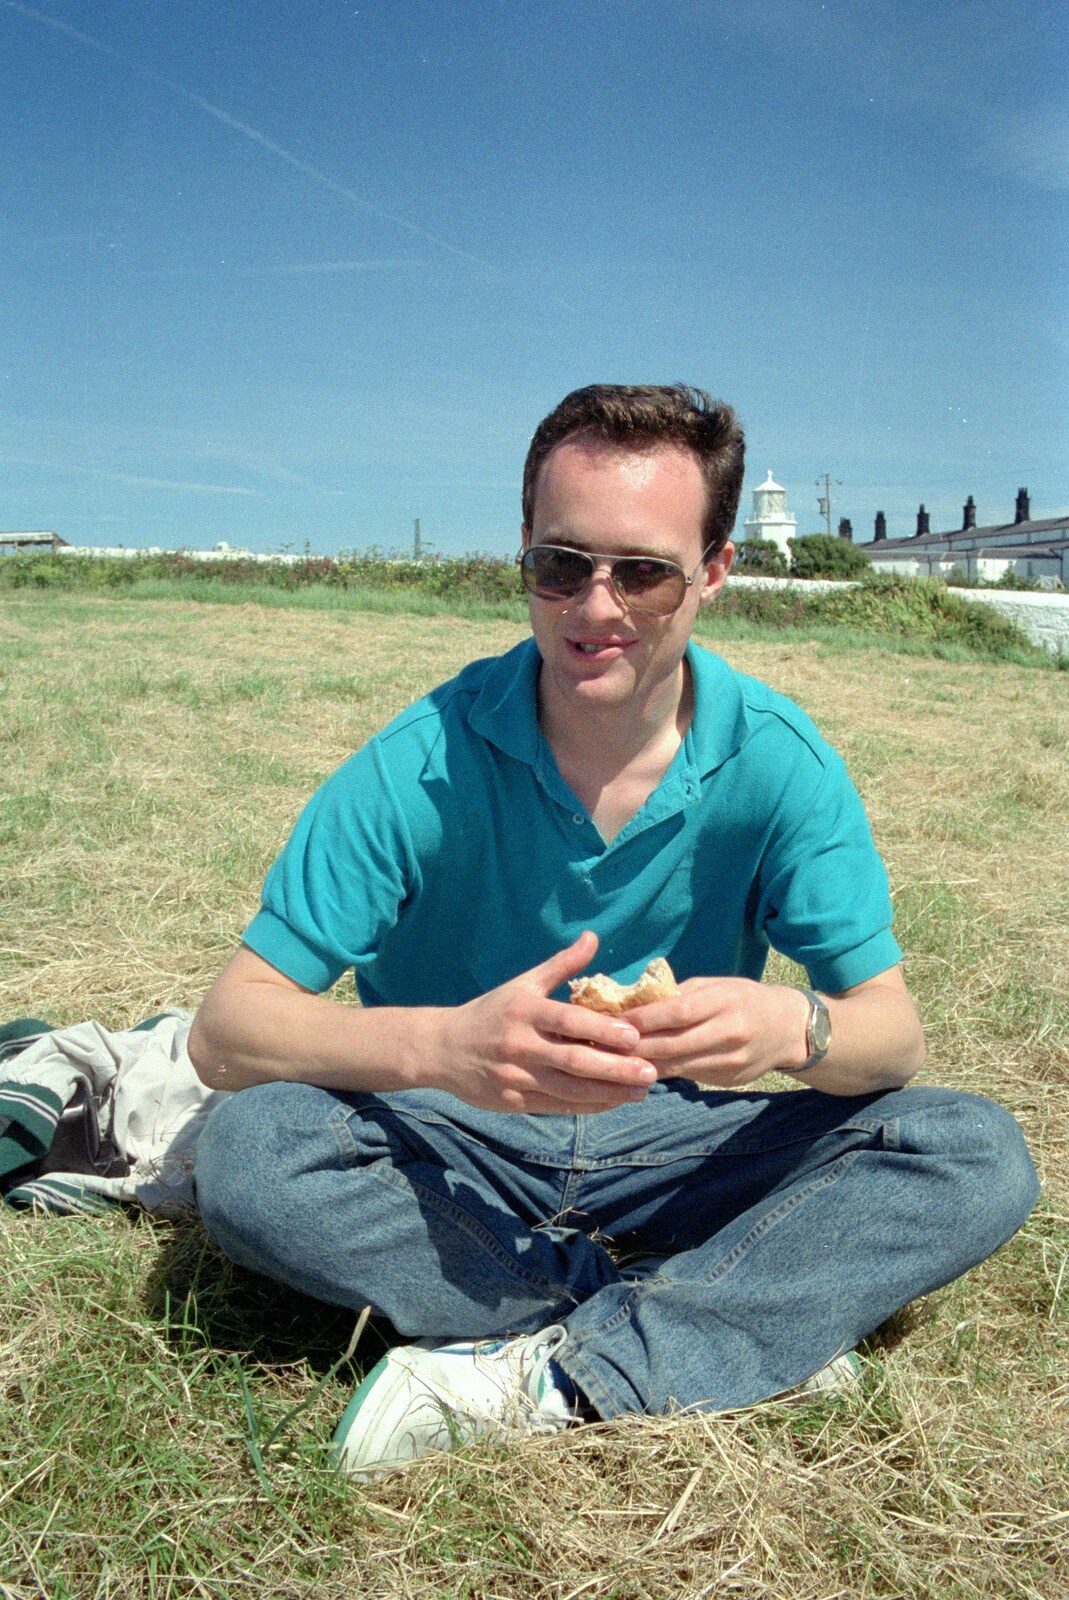 Chris eats a roll from Uni: An End-of-it-all Trip to Land's End, Cornwall - 13th June 1989